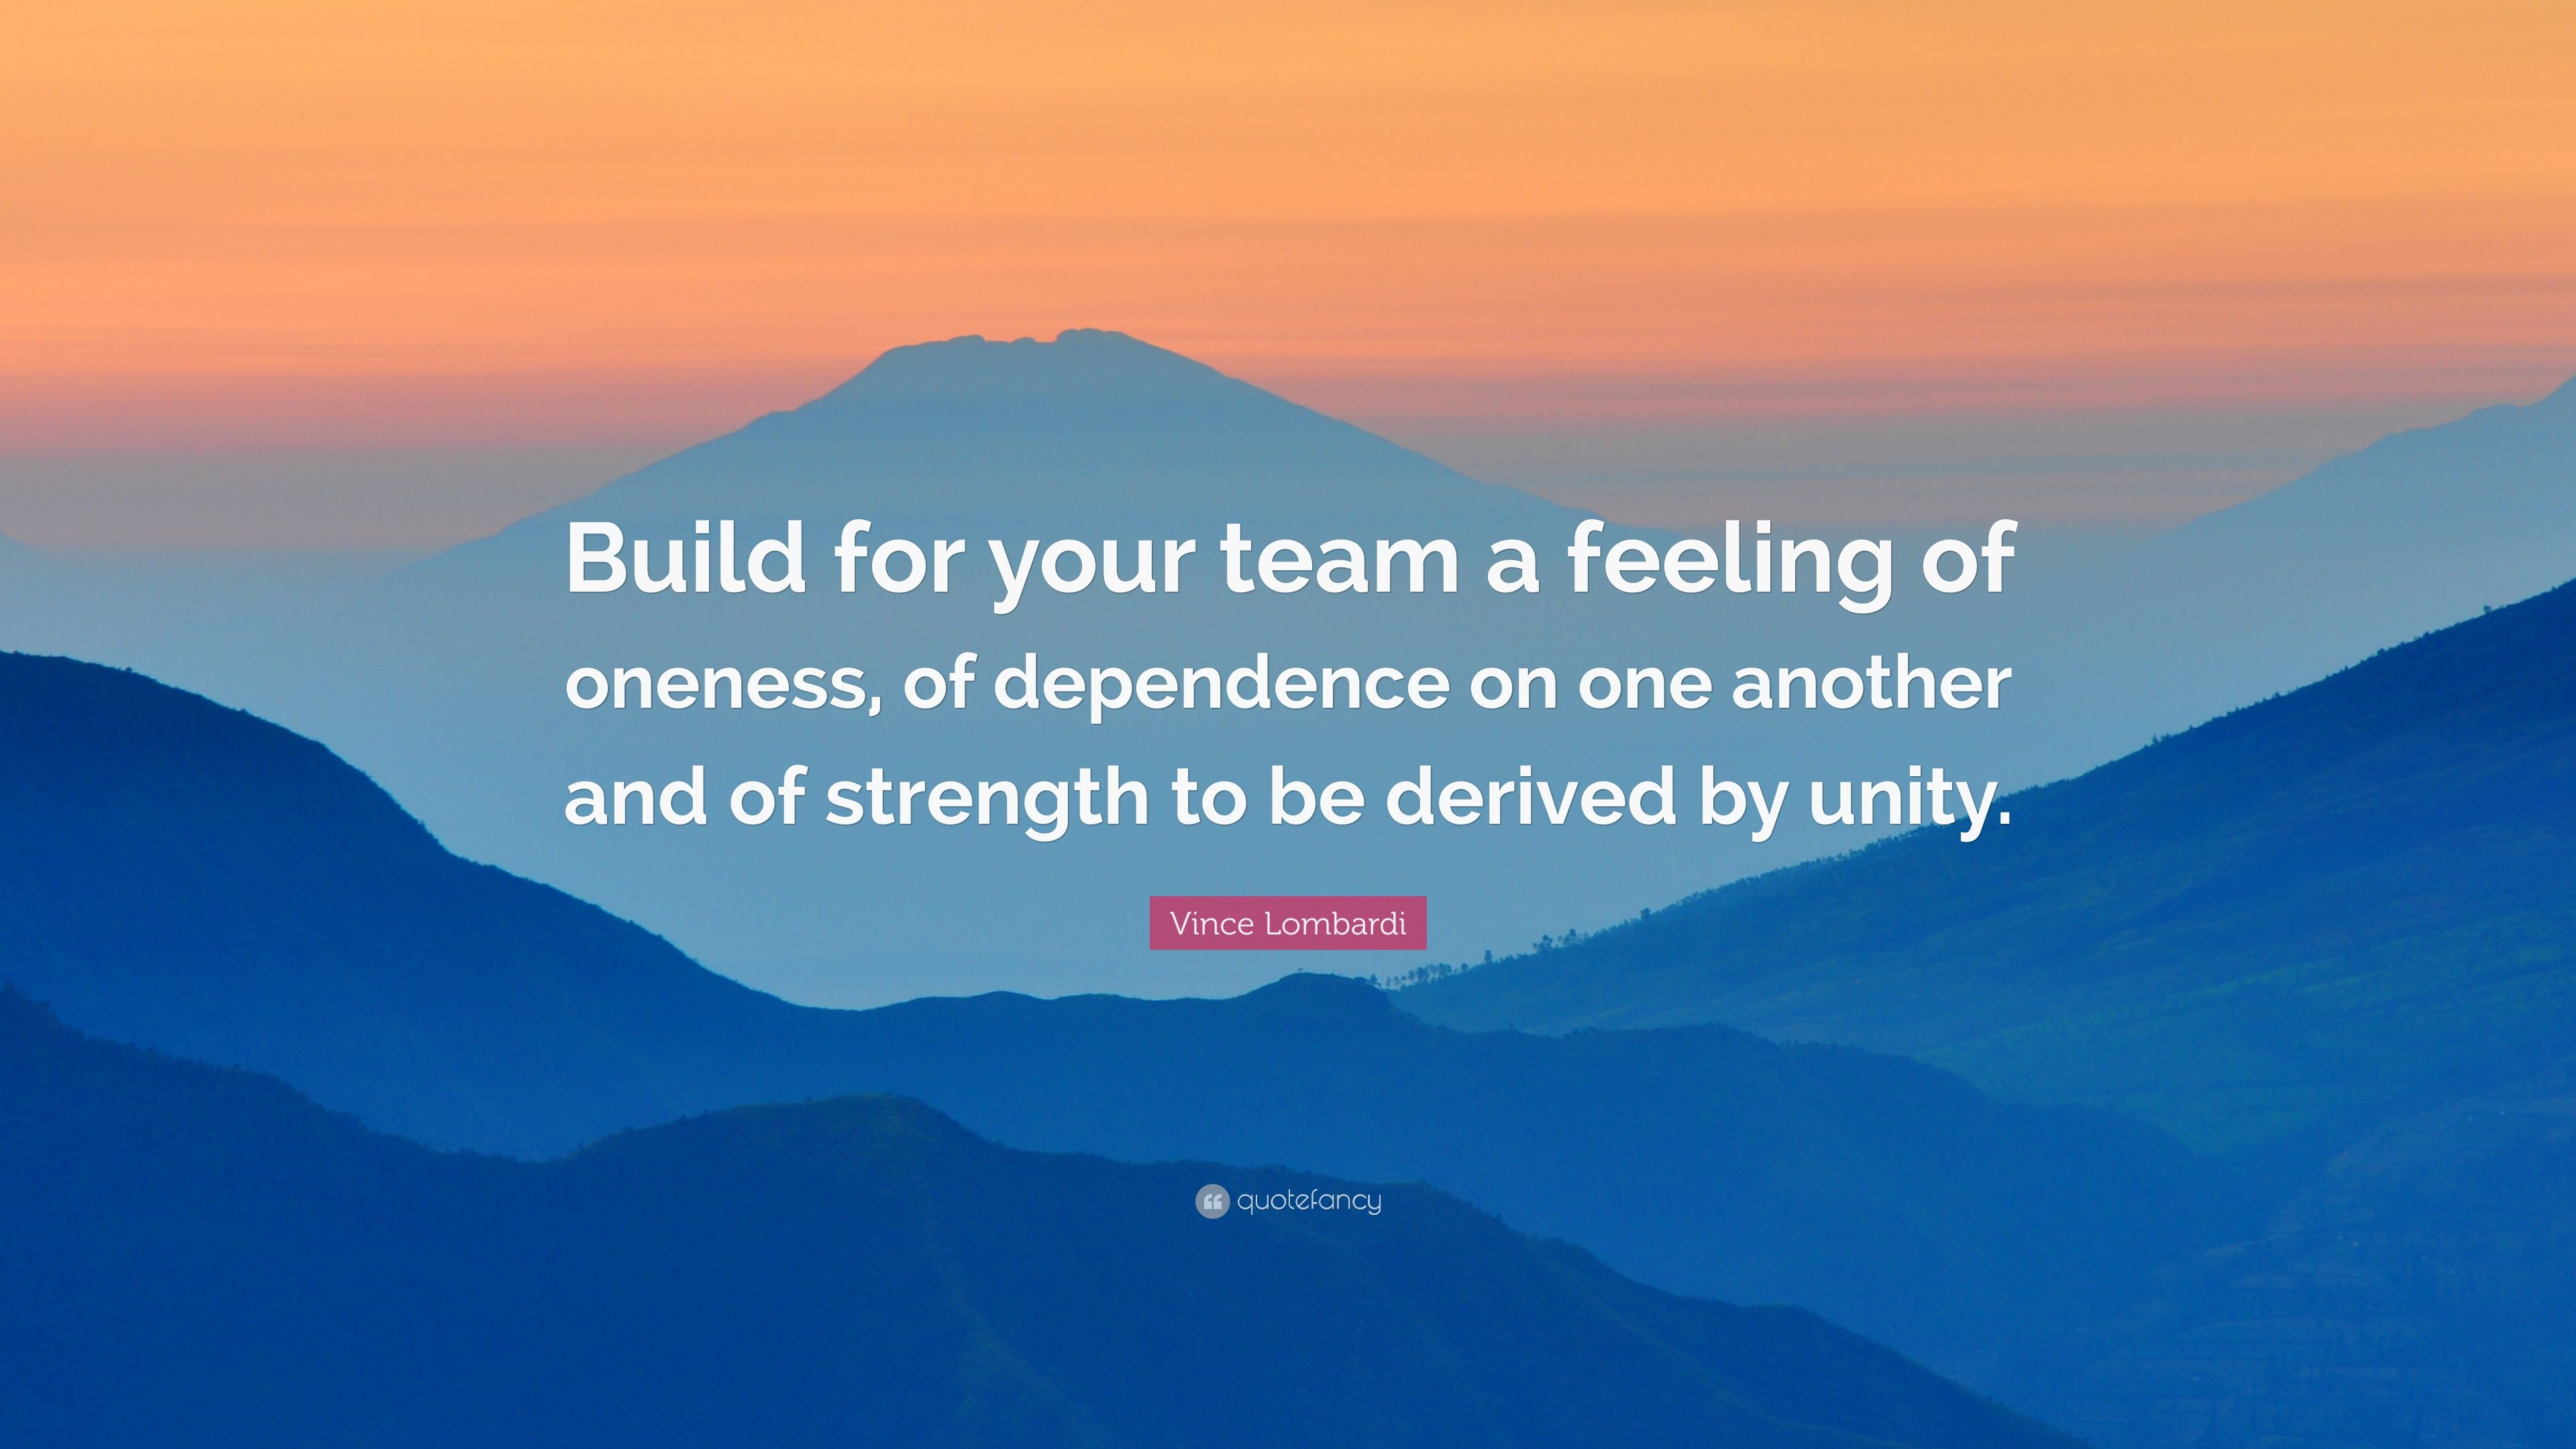 Vince Lombardi Quote: “Build for your team a feeling of oneness, of dependence on one another and of strength to be derived by unity.” (12 wallpaper)